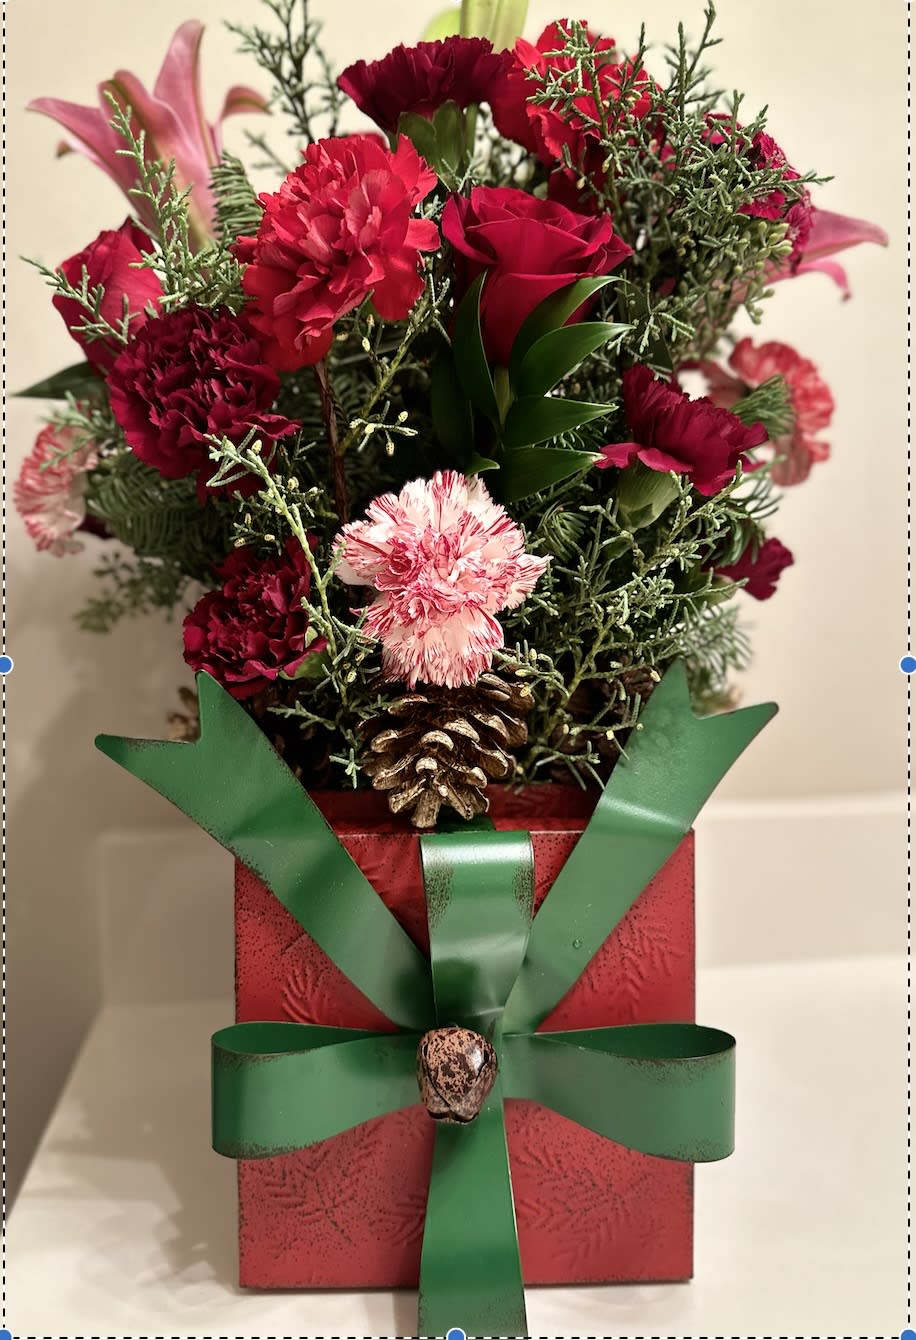 Capture the magic of the holidays with this colorful center piece of